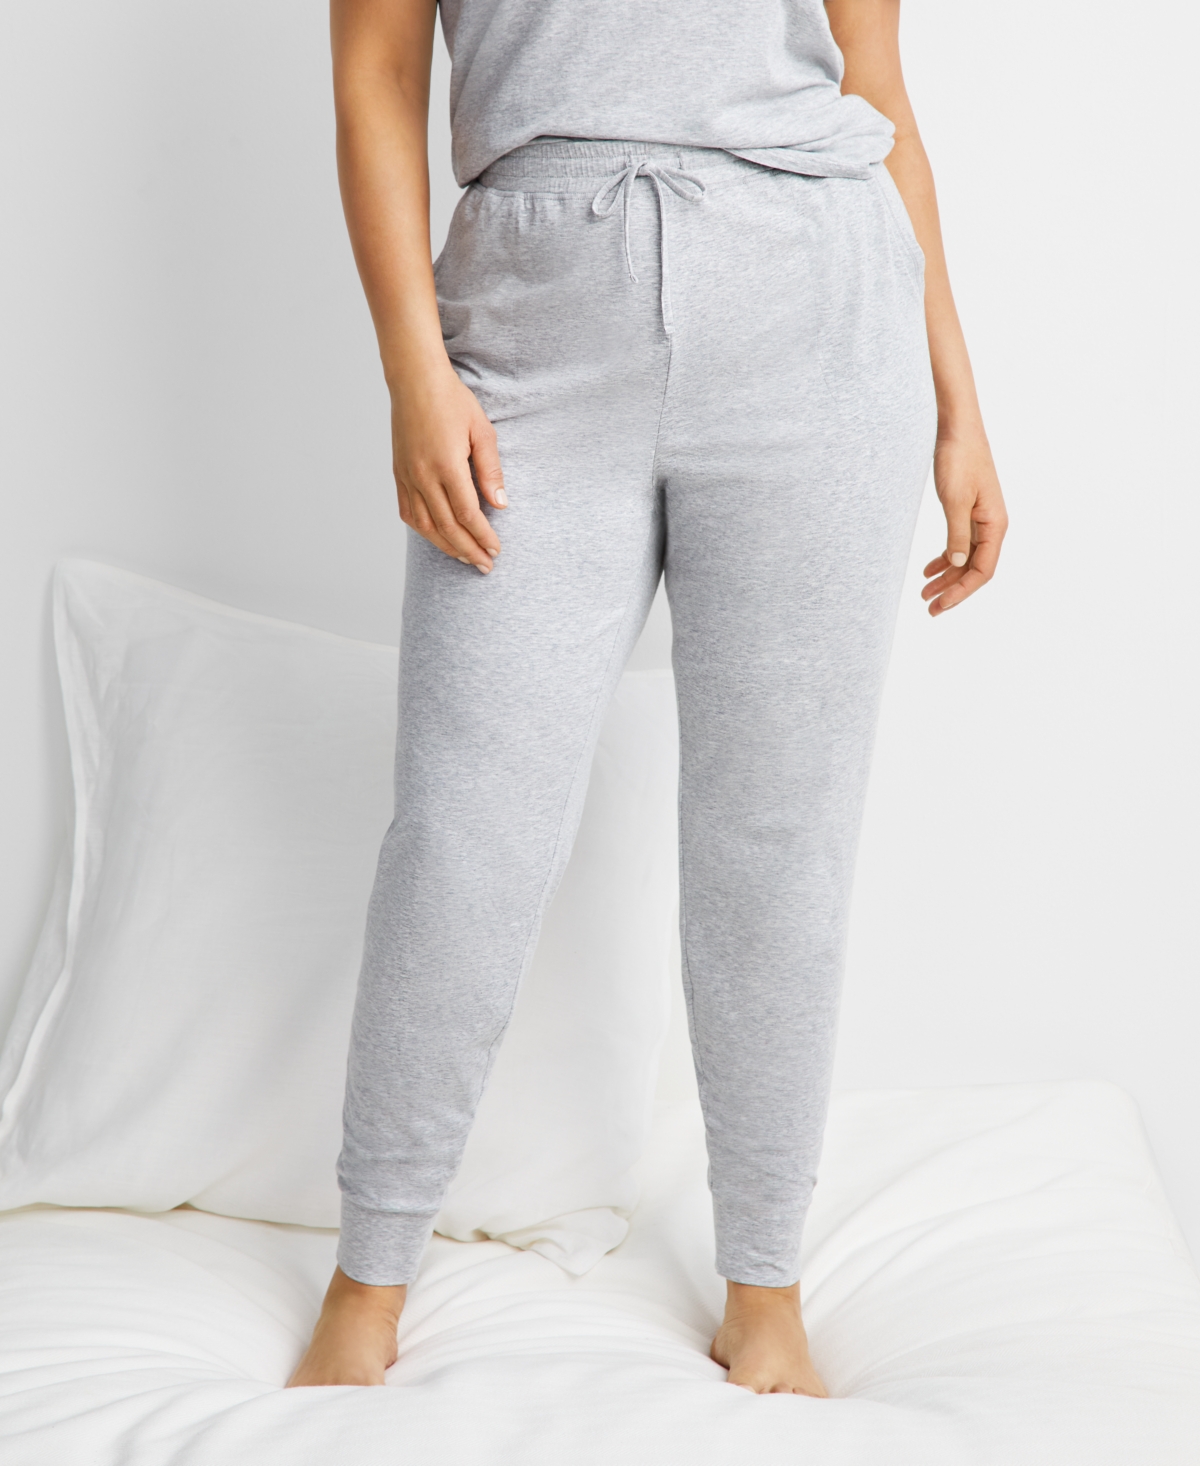 State Of Day Women's Jogger Pajama Pants Xs-3x, Created For Macy's